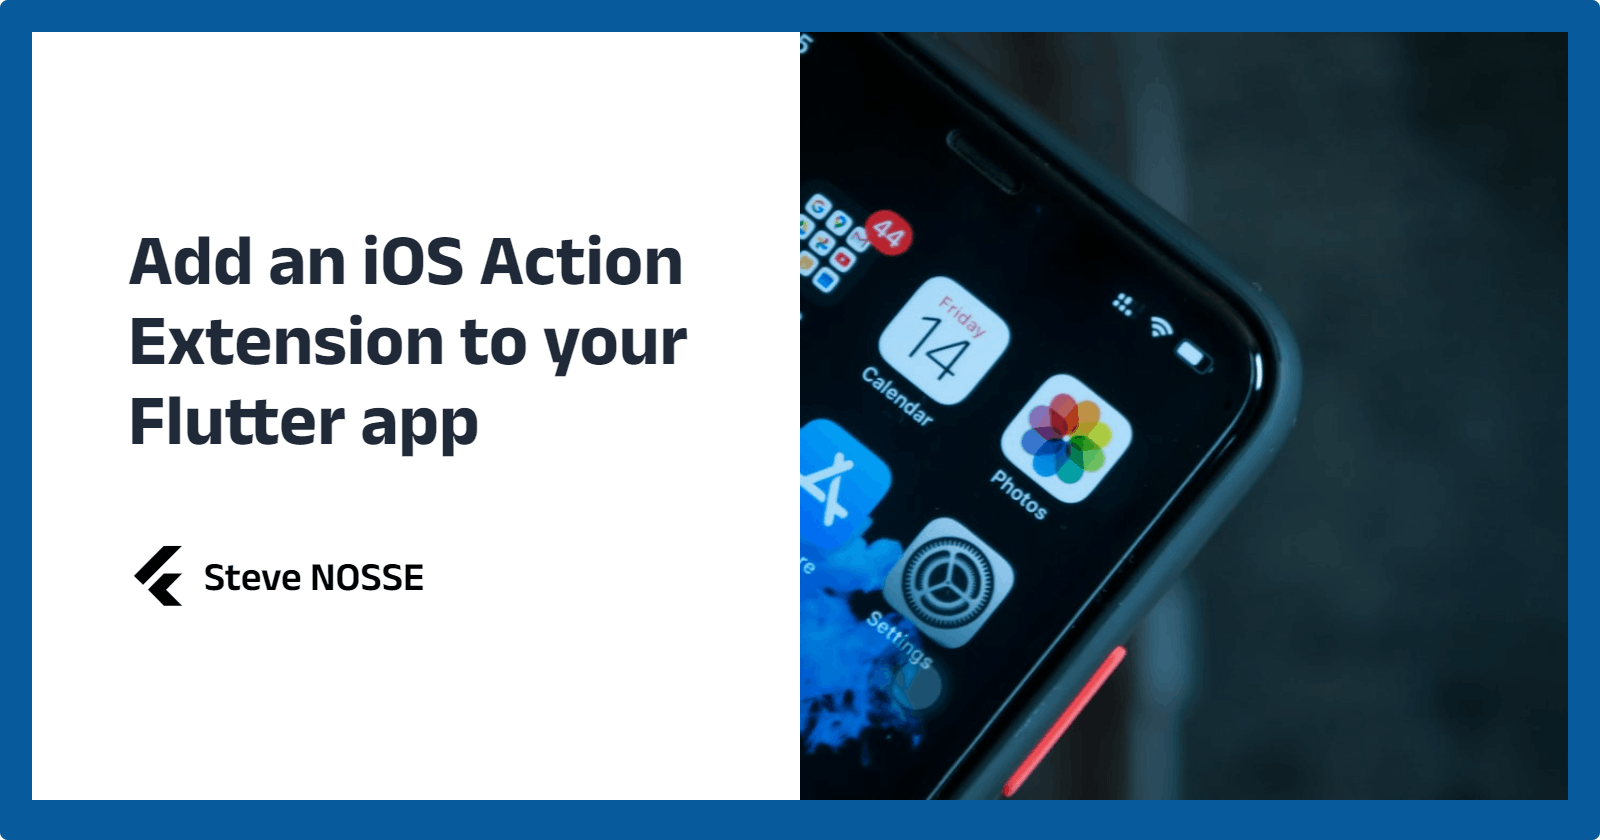 Add an iOS Action Extension to your Flutter app